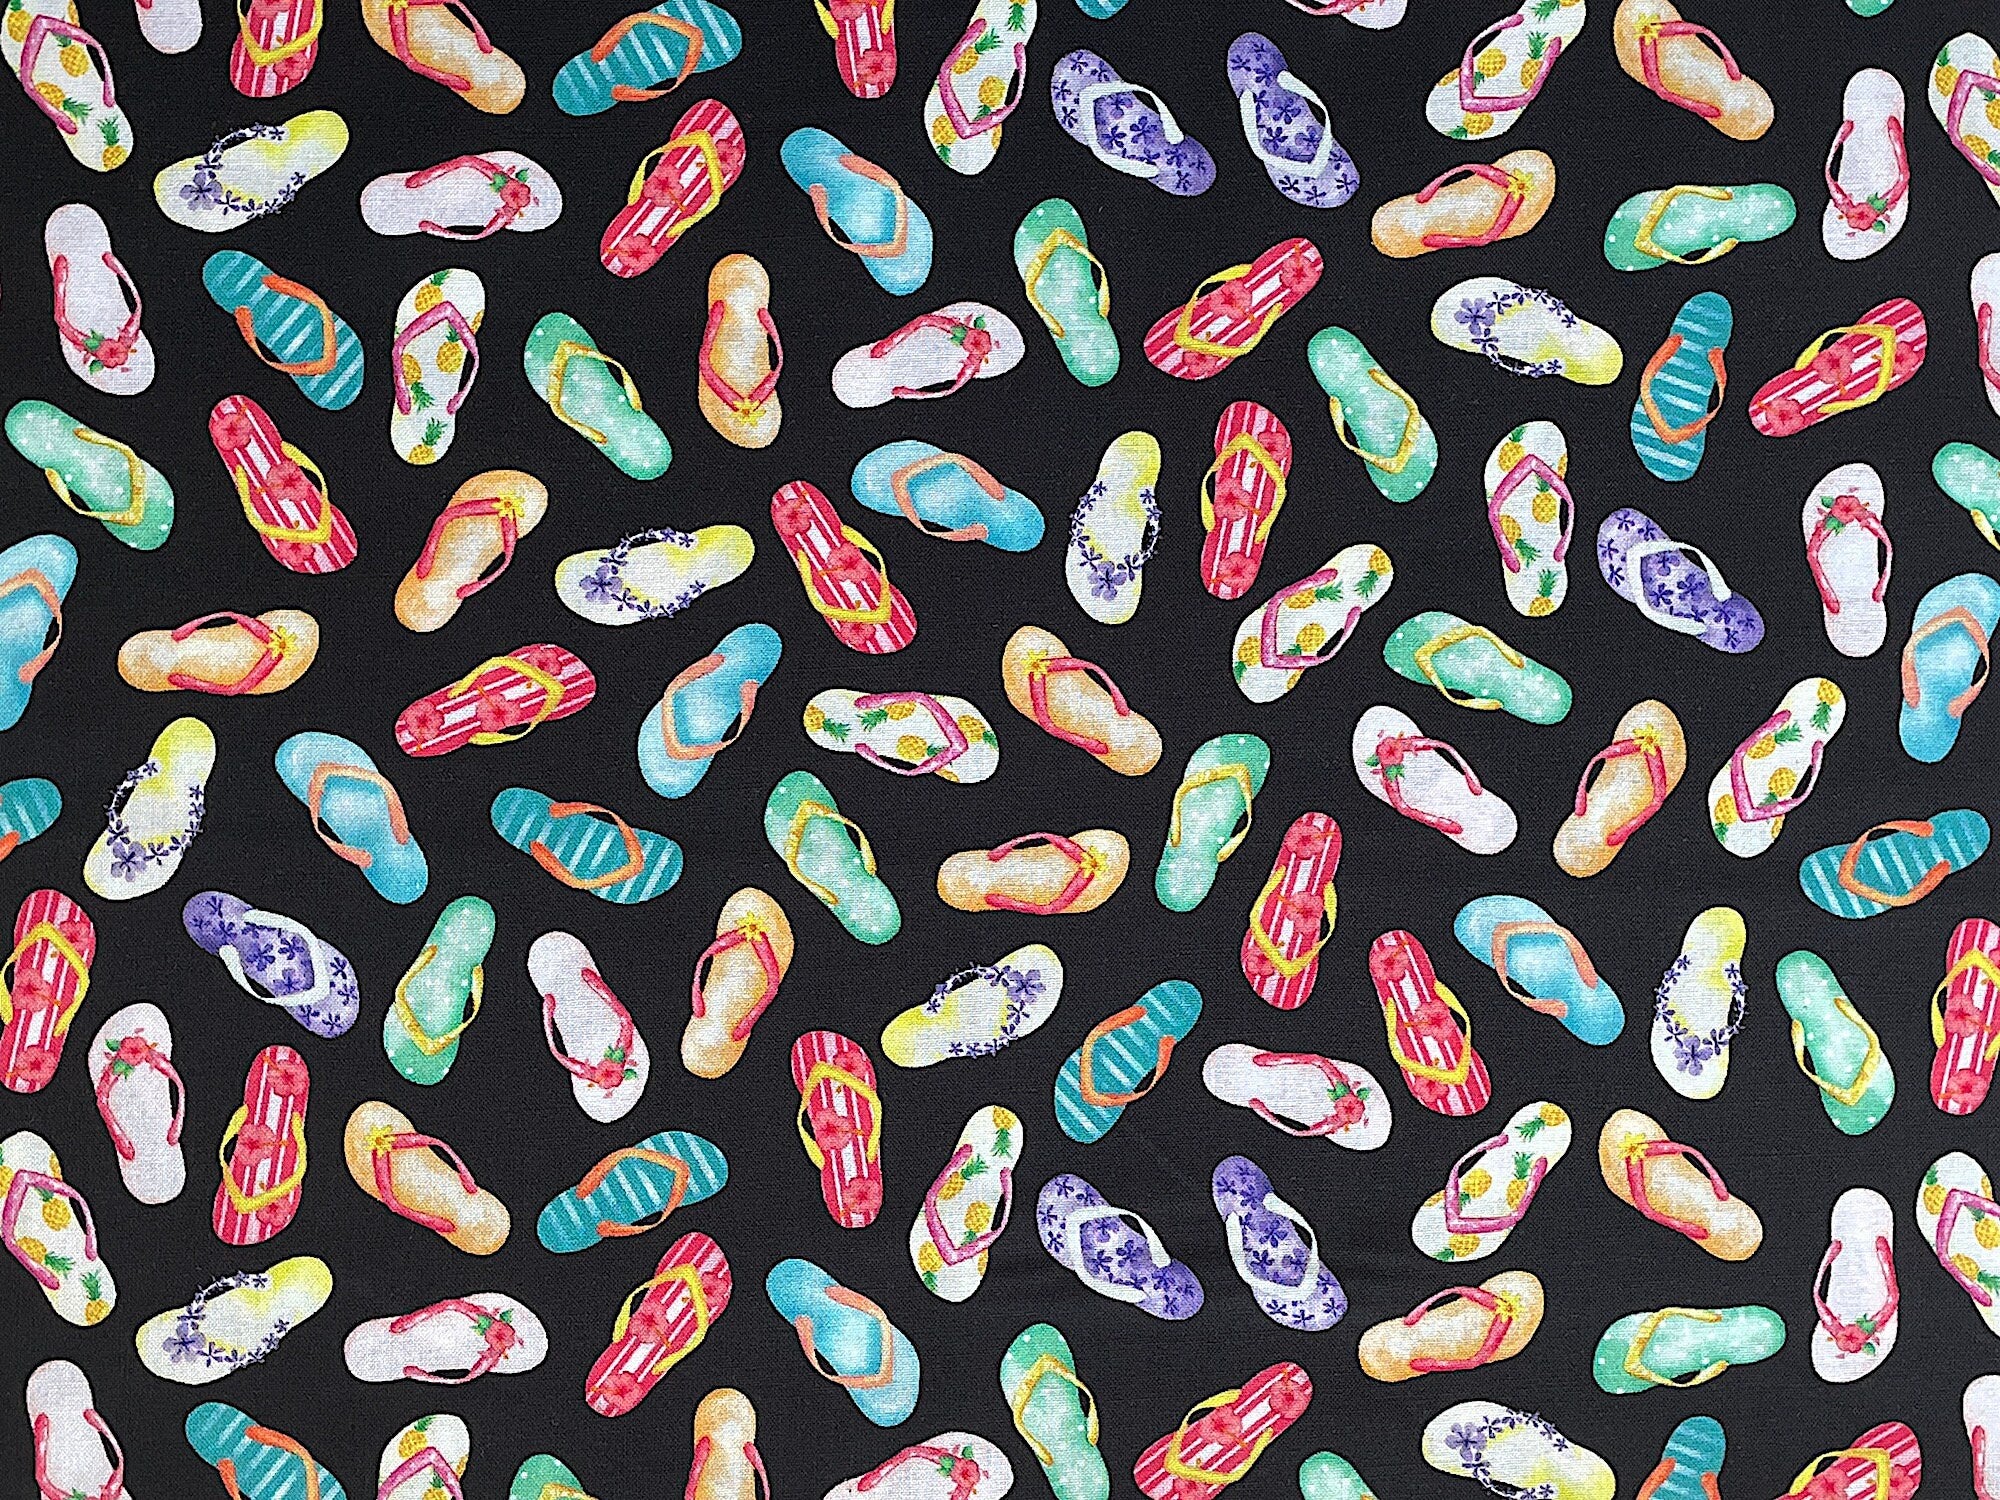 Black cotton fabric covered with colorful flip flops.